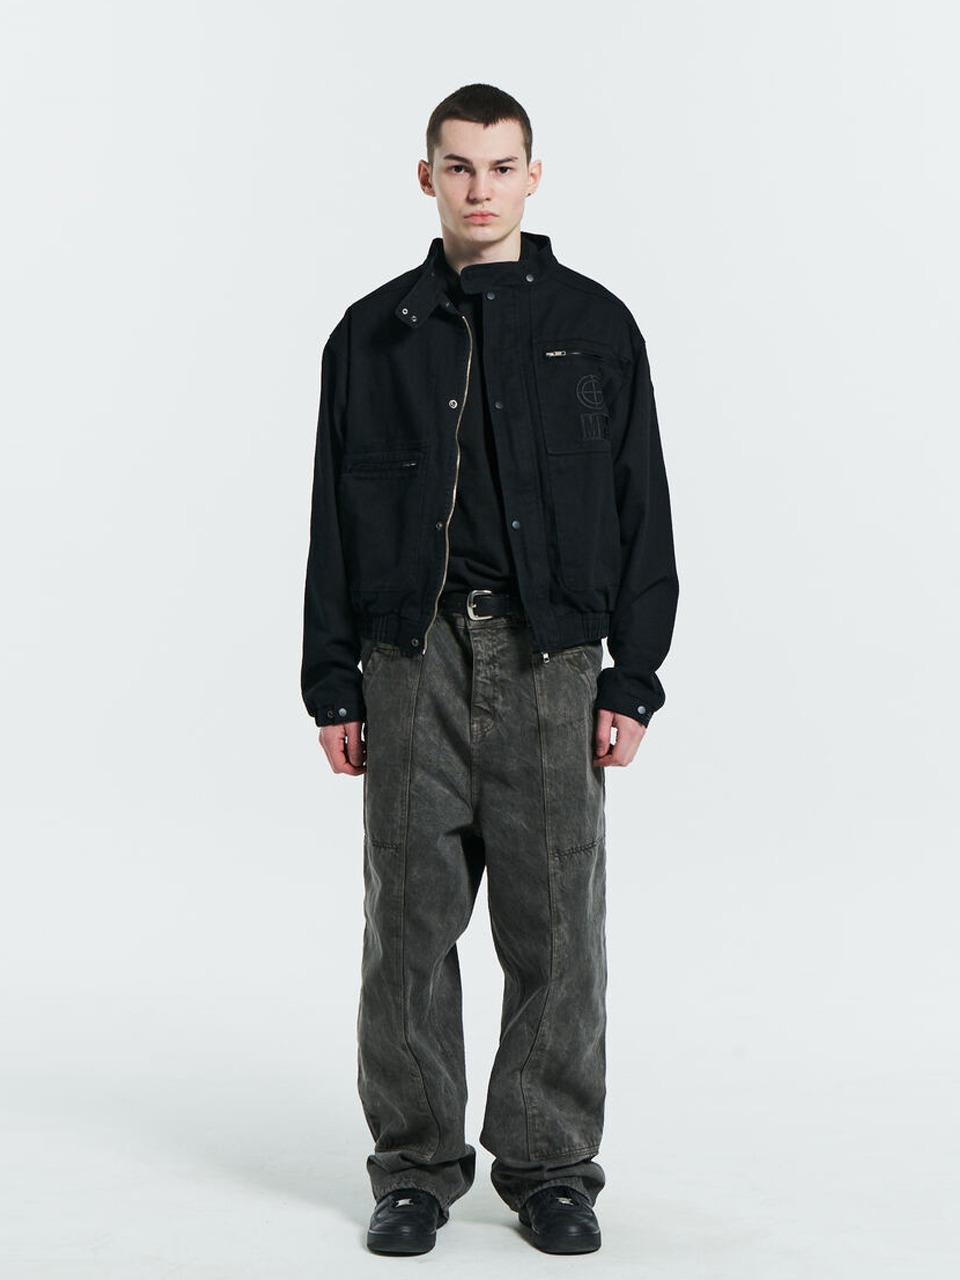 PLASTICPRODUCT - MPa MANAGER JACKET (BLACK)